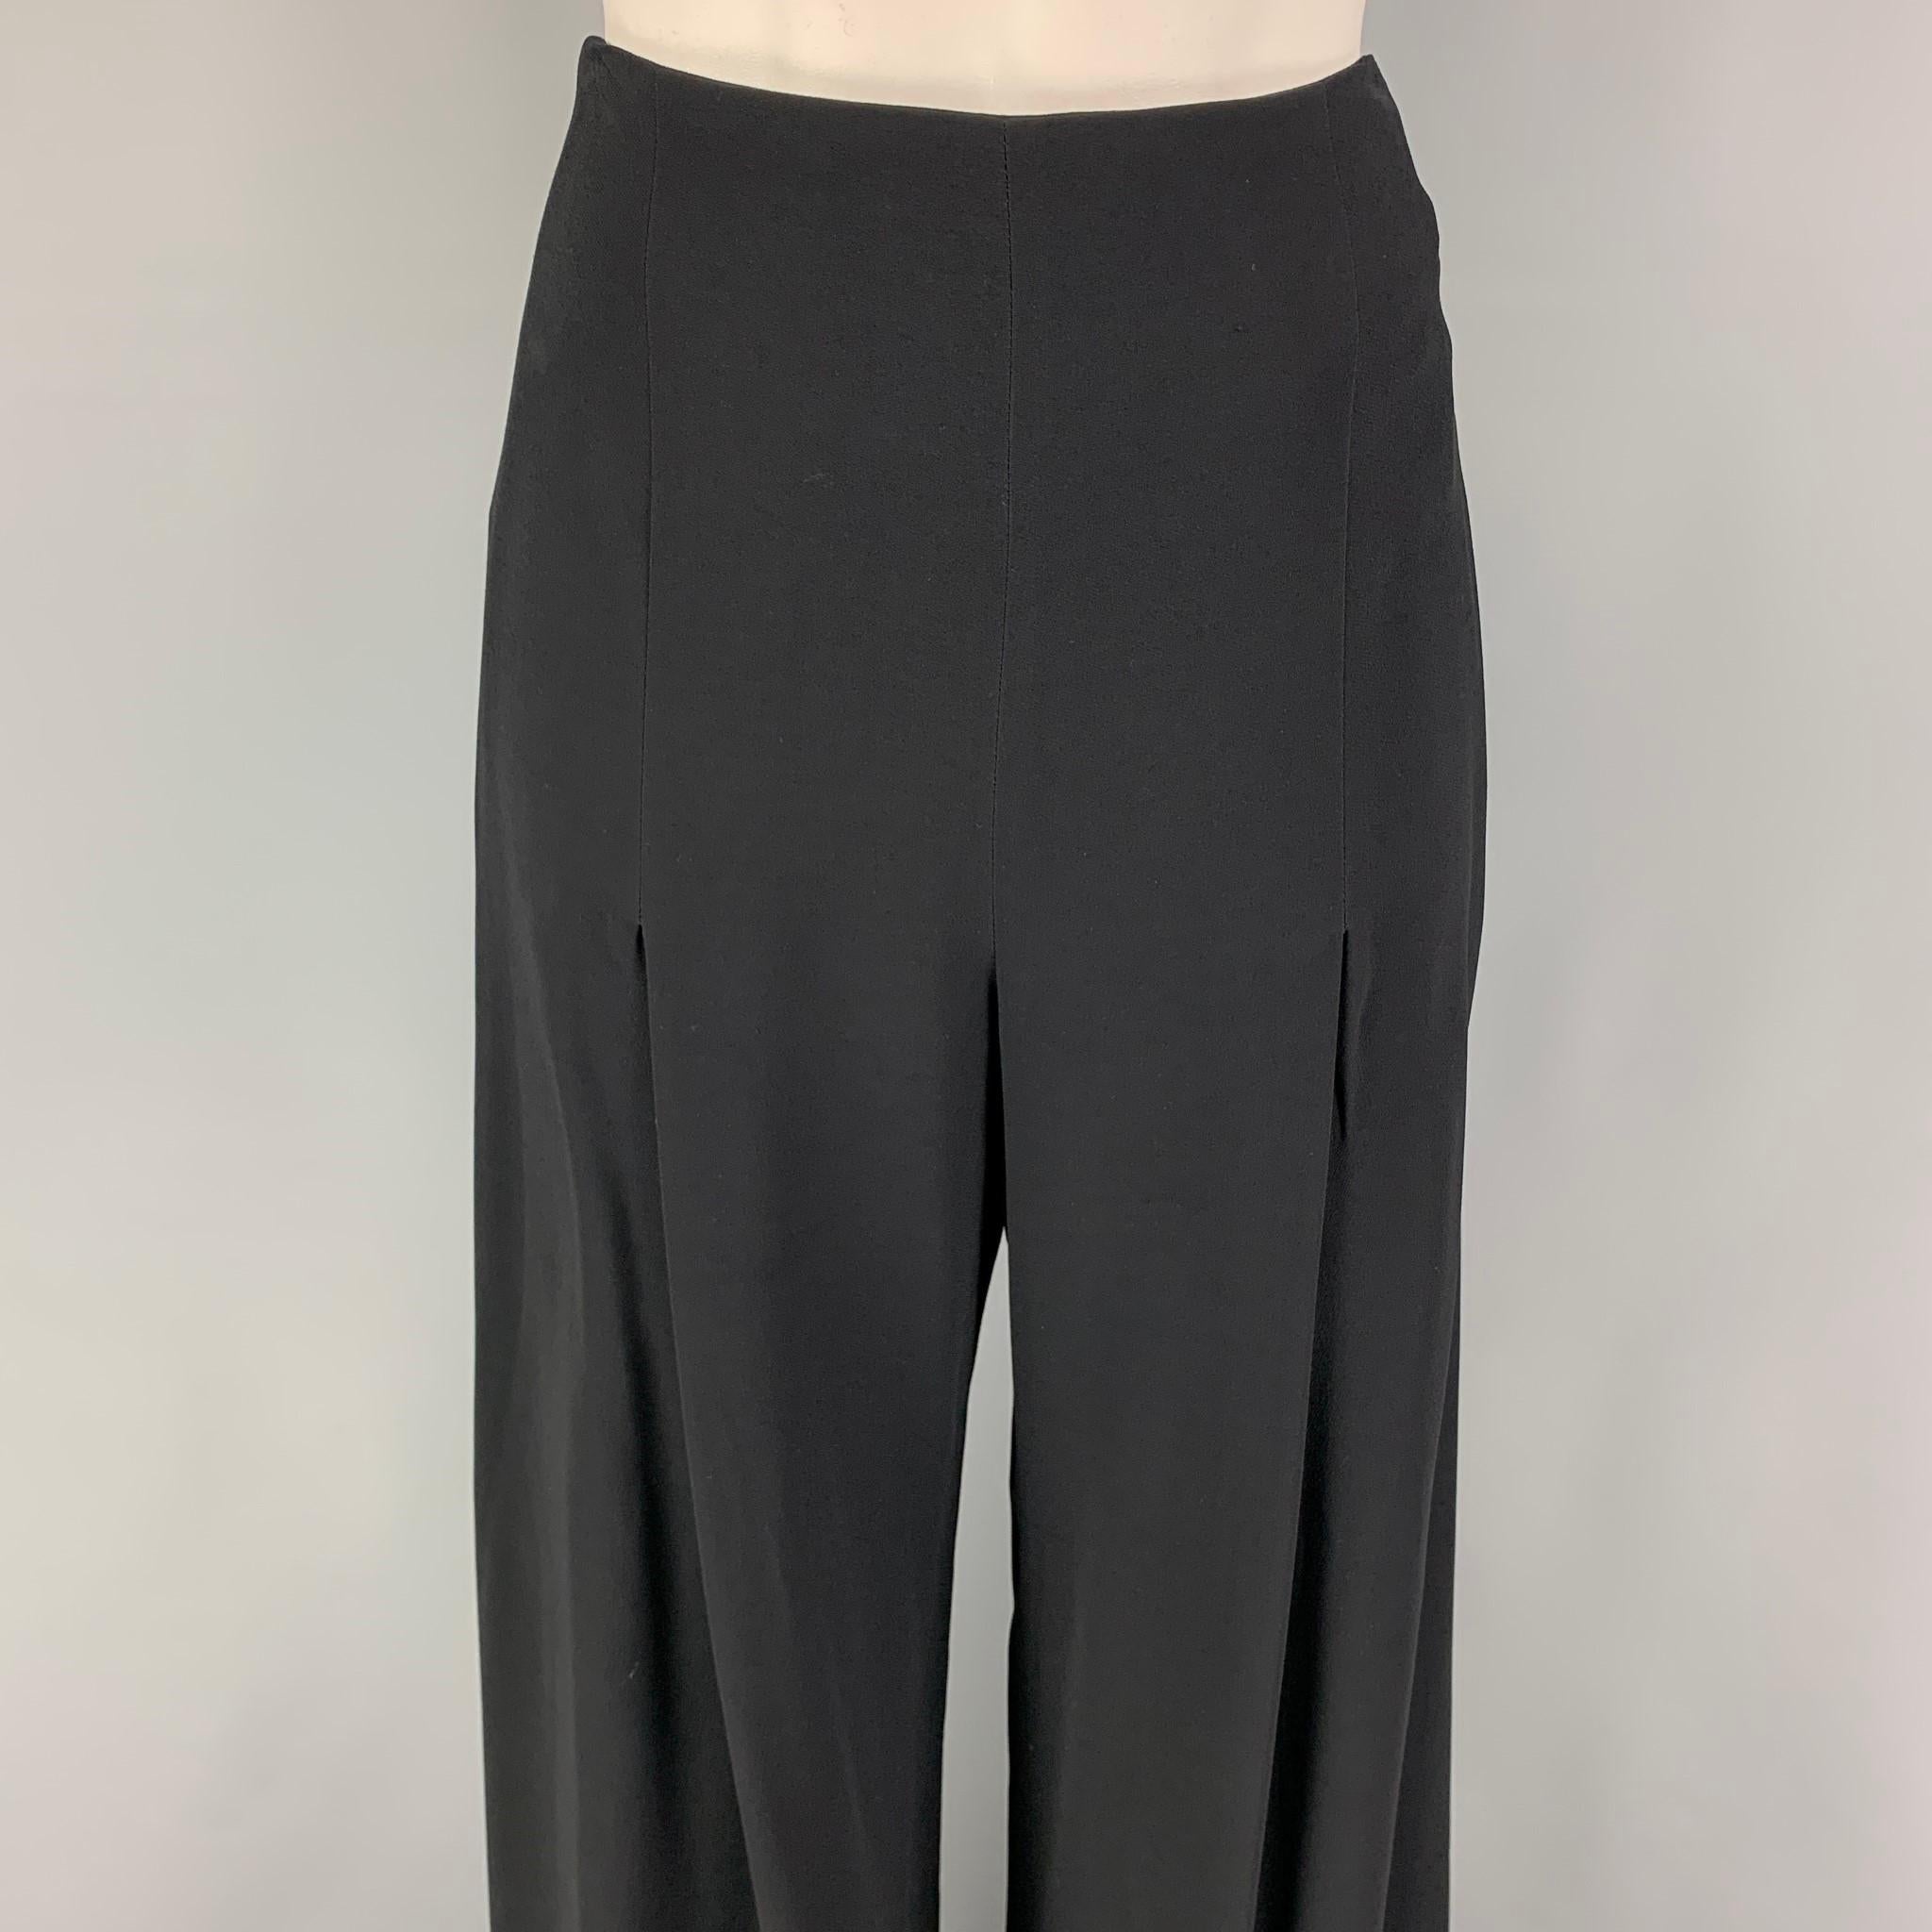 OSCAR DE LA RENTA dress pants comes in a black viscose featuring a wide leg style, pleated design, high waisted, and a side zipper closure. 

Very Good Pre-Owned Condition.
Marked: 8

Measurements:

Waist: 30 in.
Rise: 12.5 in.
Inseam: 36 in.
Leg